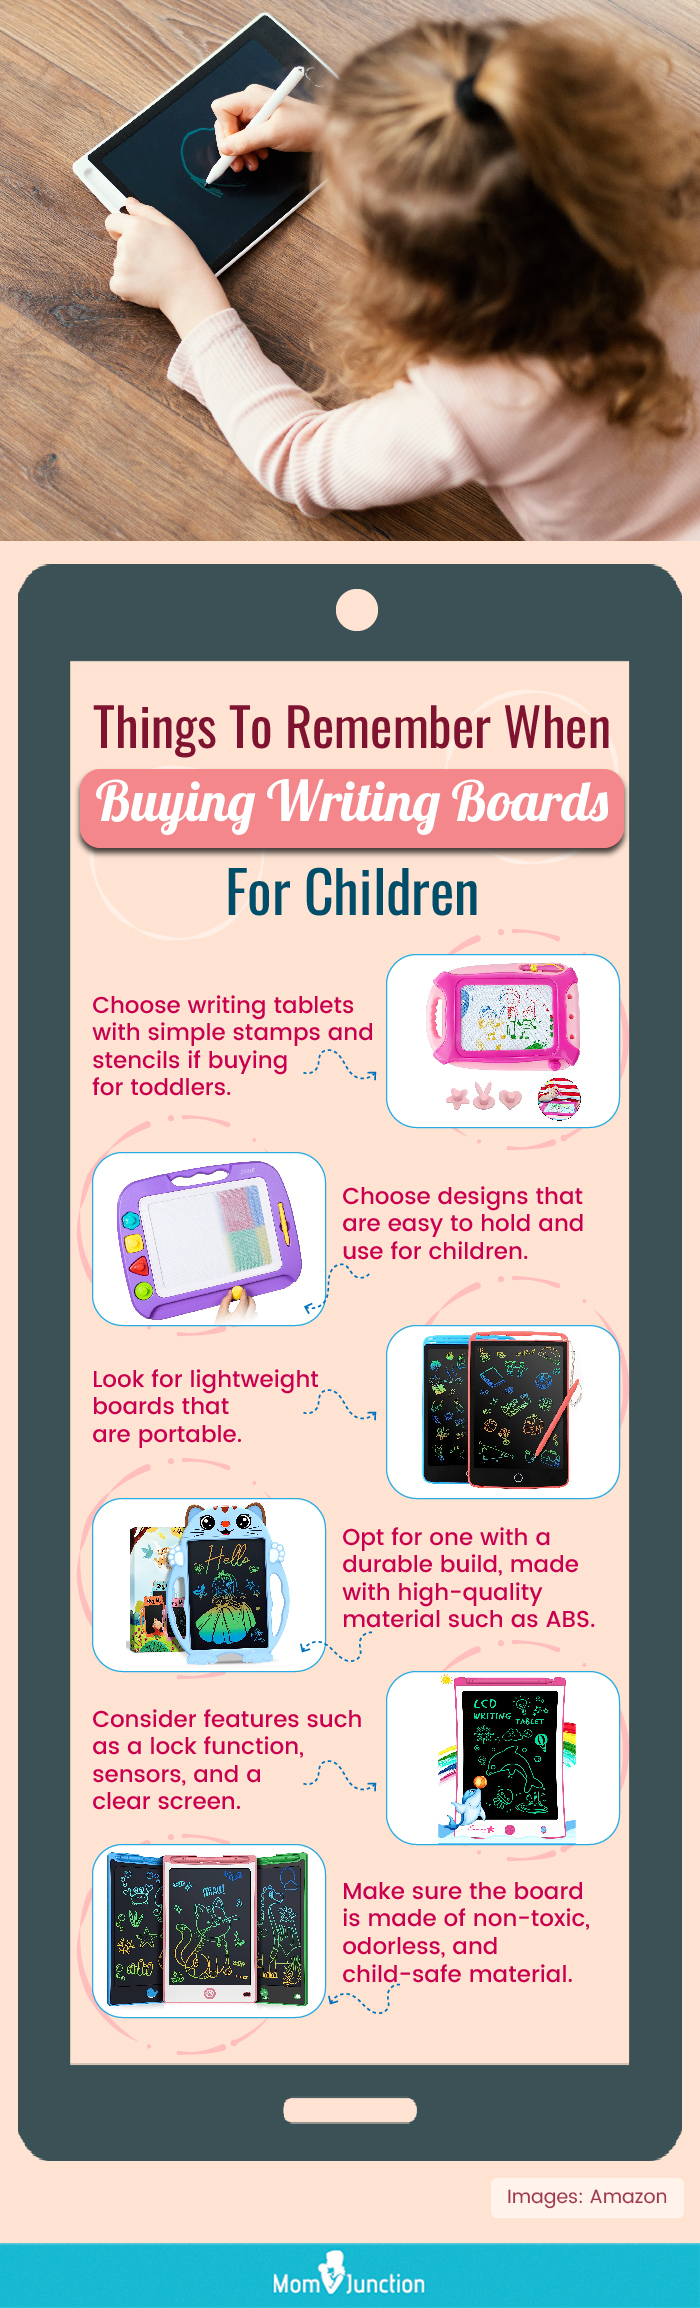 Things To Remember When Buying Writing Boards For Children (infographic)